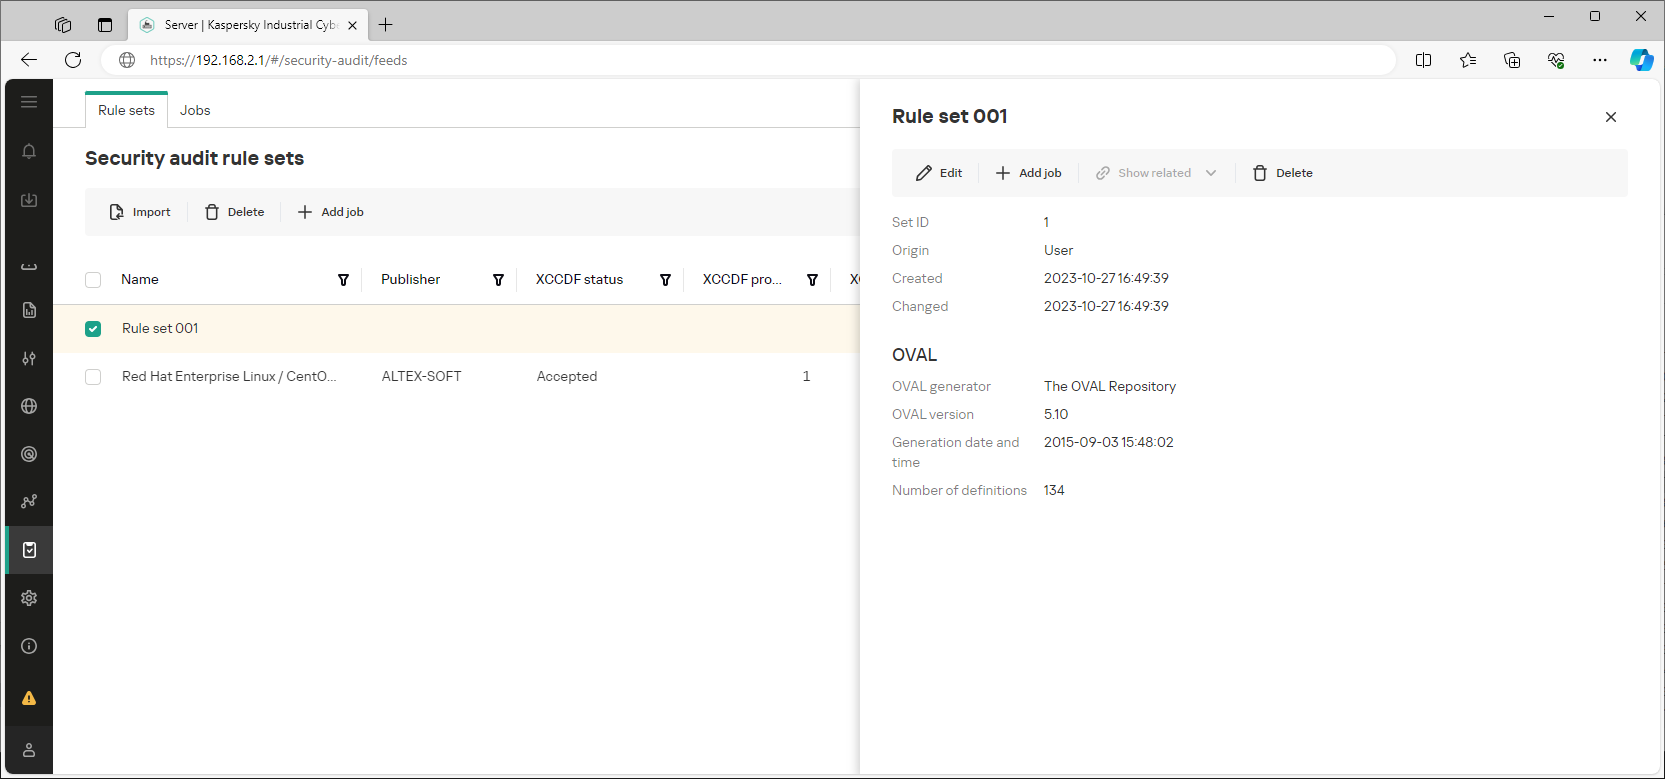 Example of the displayed interface elements and data in the "Security audit" section.